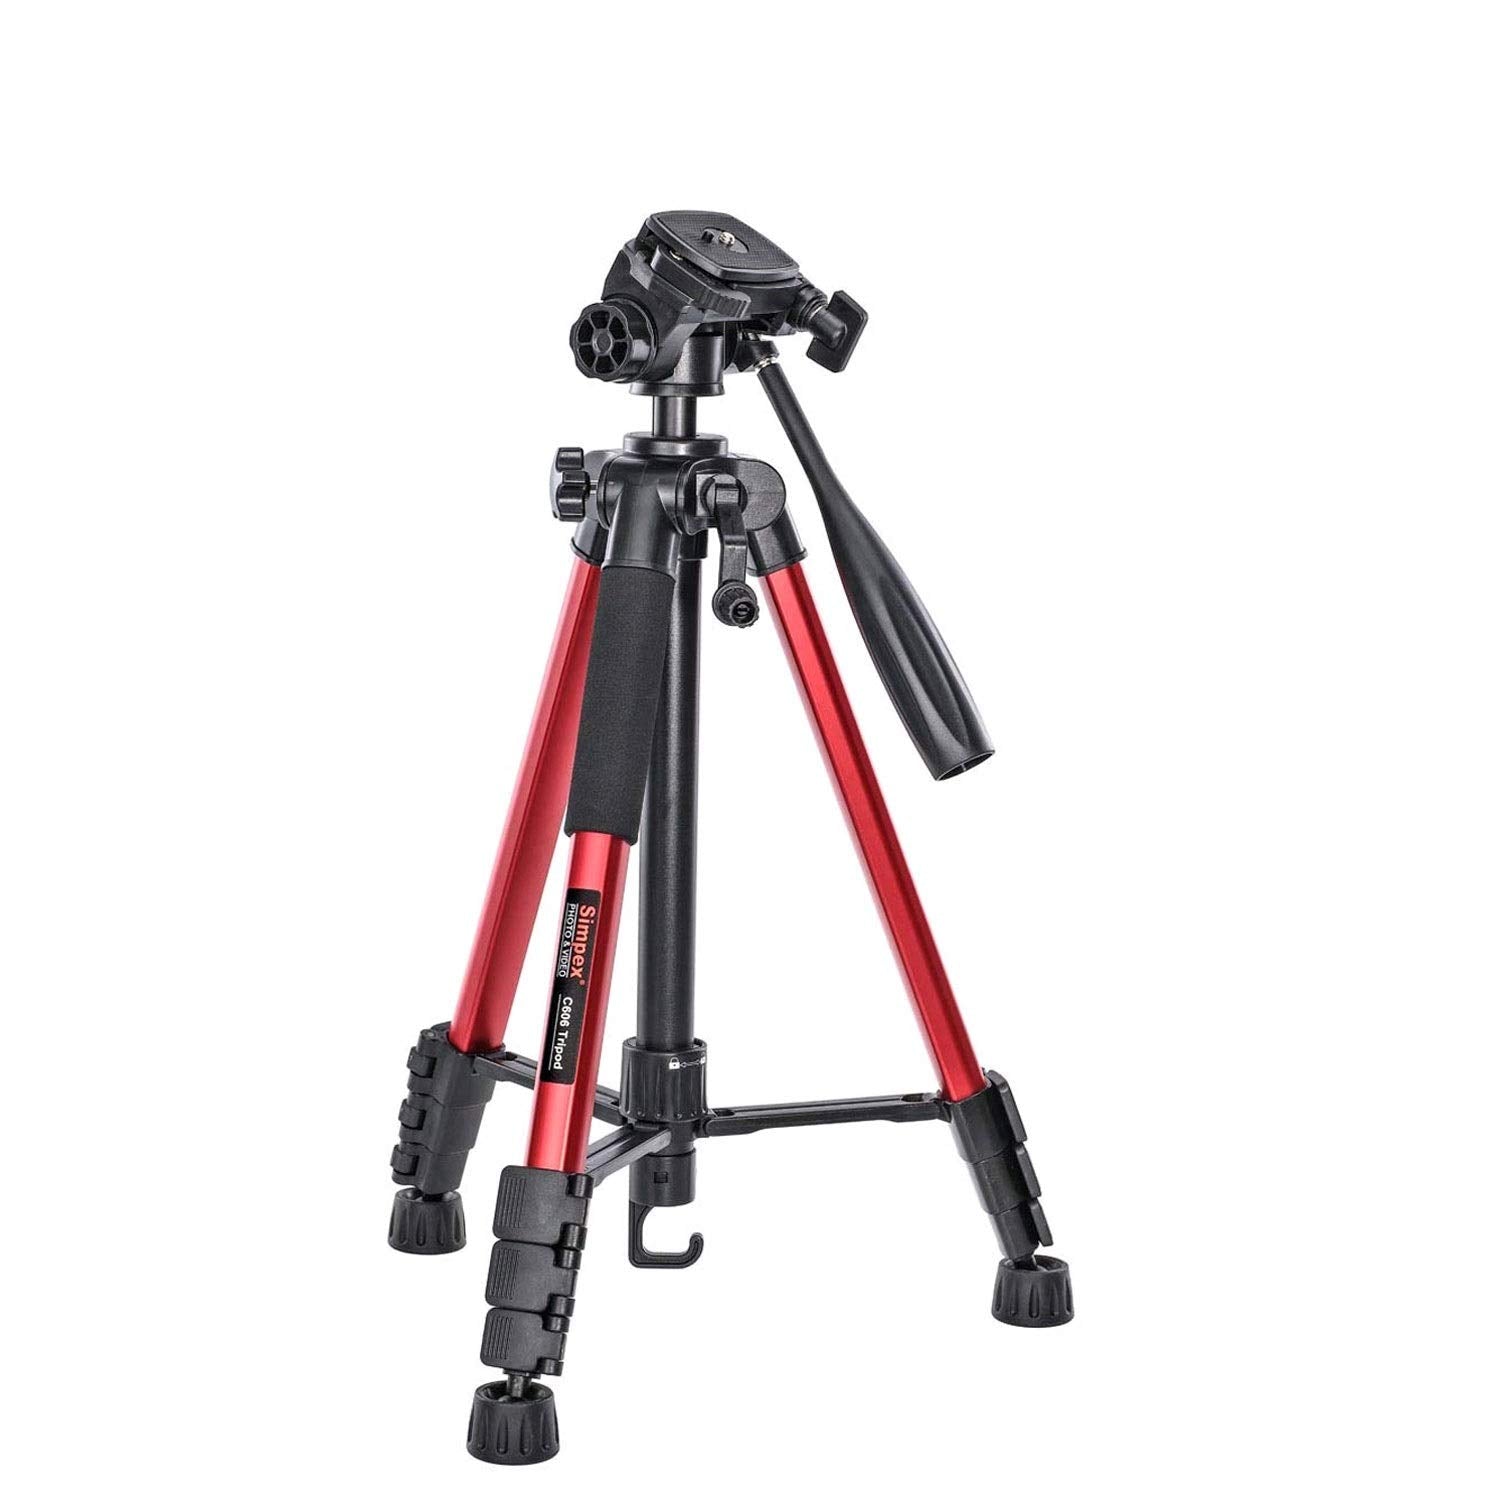 Simpex Tripod C-606 - Professional Tripod with Carry Bag (Red)